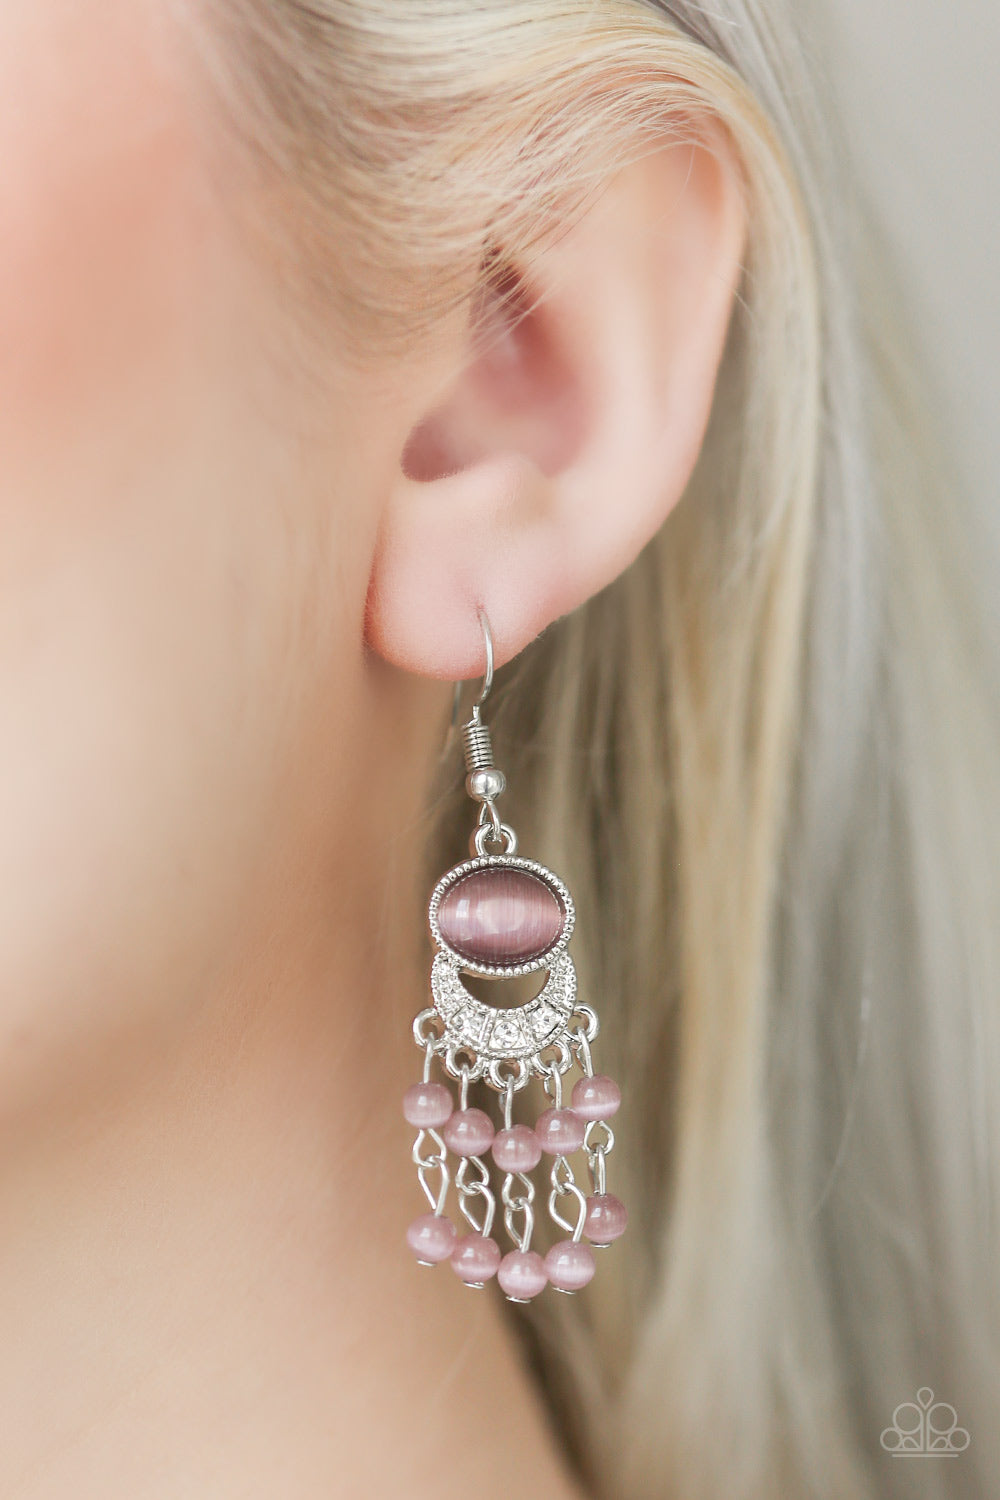 Paparazzi A Spring State Of Mind - Purple Moonstone - White Rhinestones - Earrings - $5 Jewelry With Ashley Swint